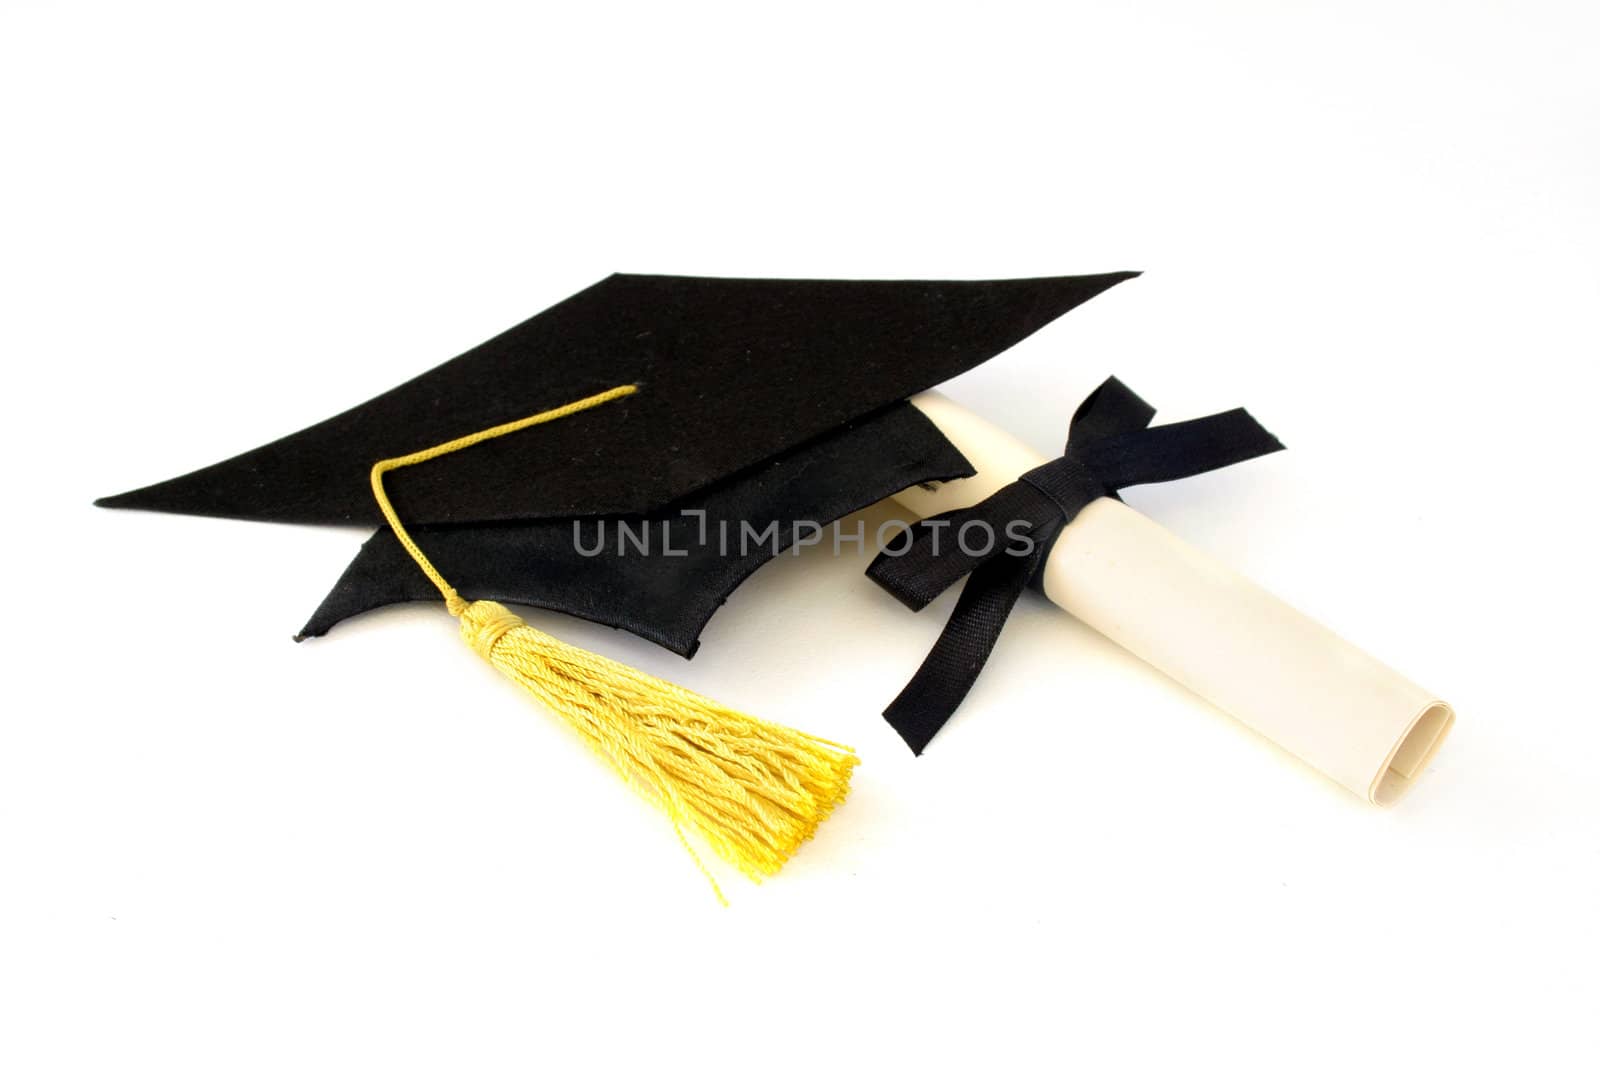 graduation cap and diploma isolated on a white background.
